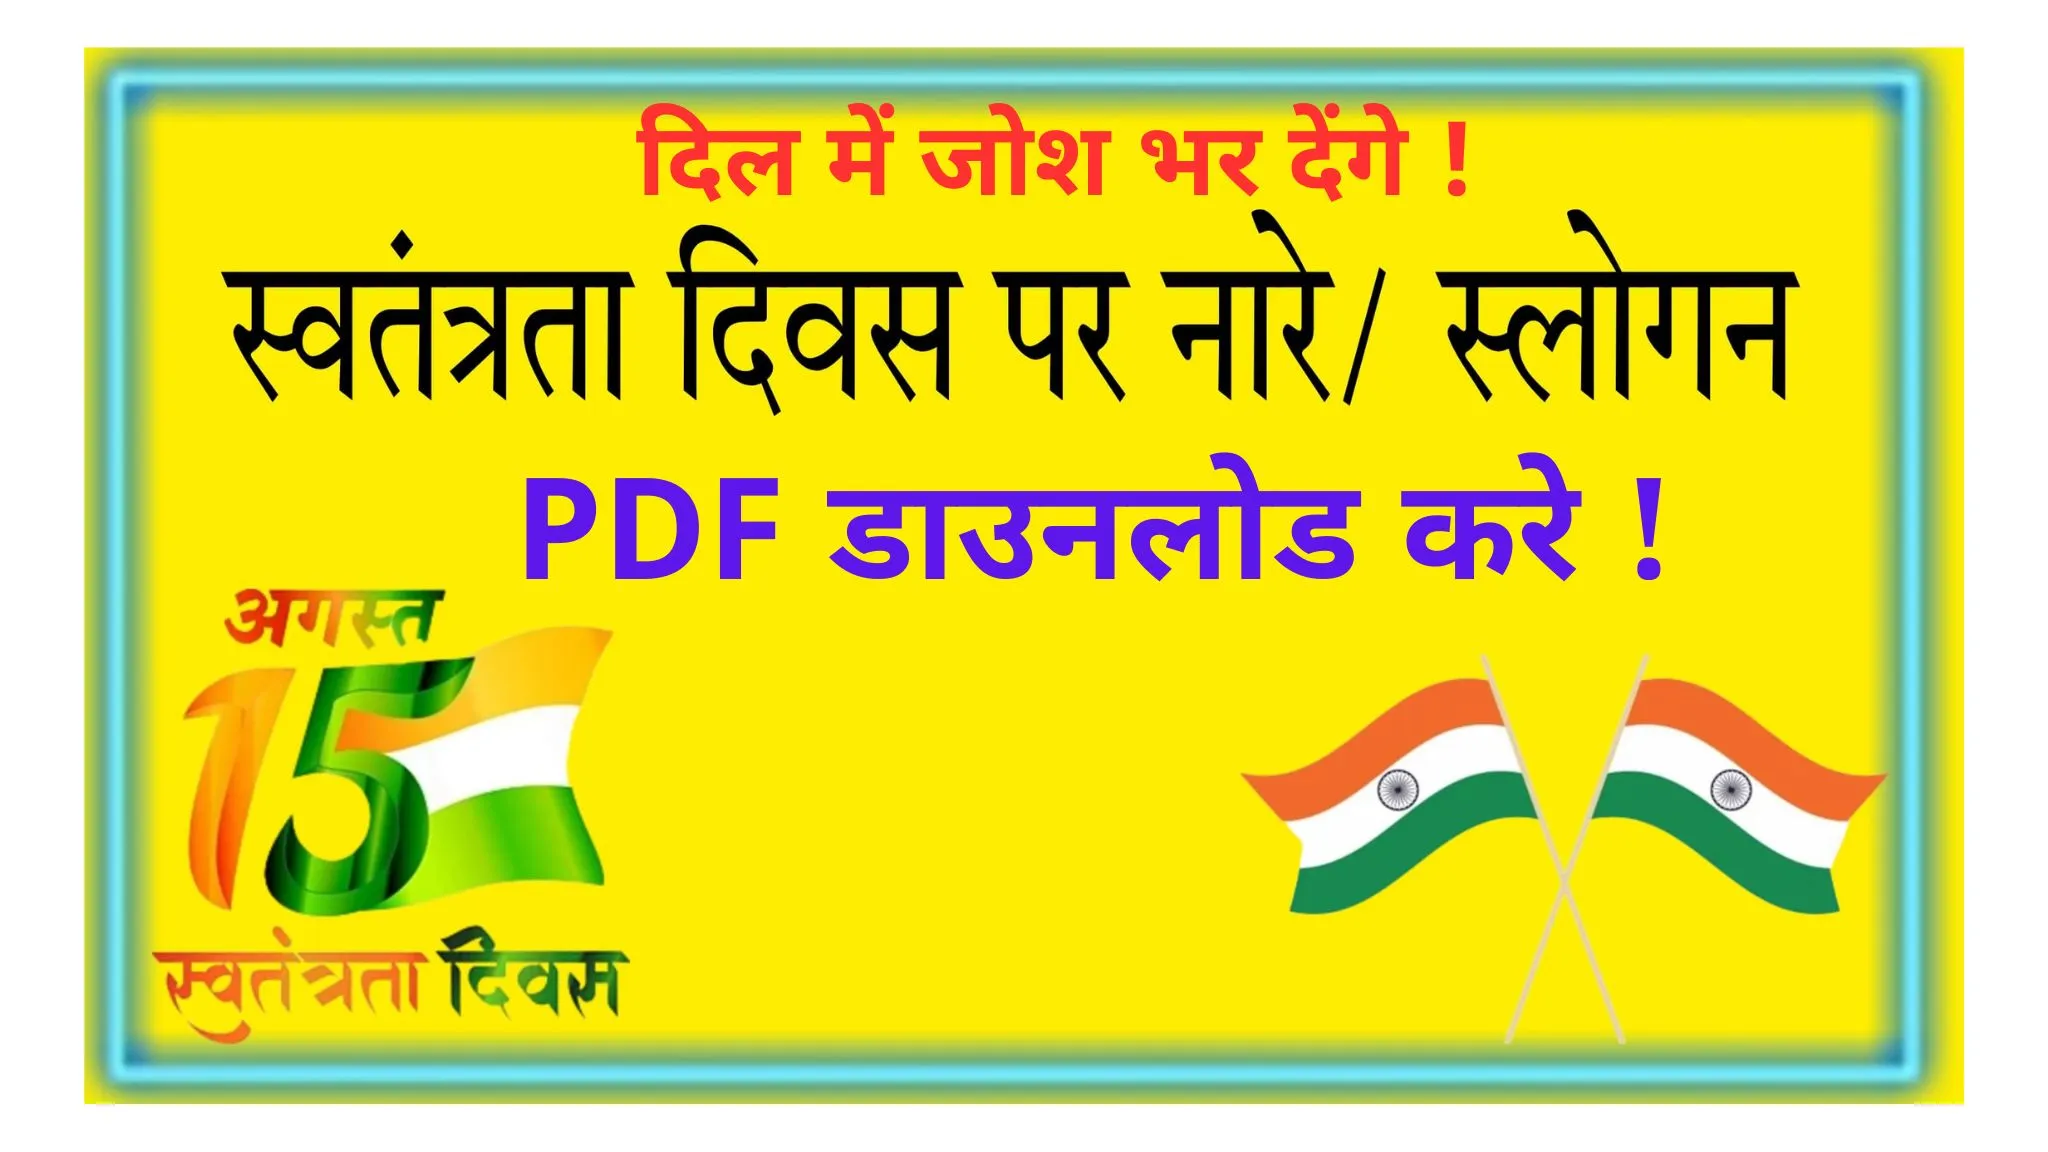 15-august-independence-day-naare-slogan-in-hindi